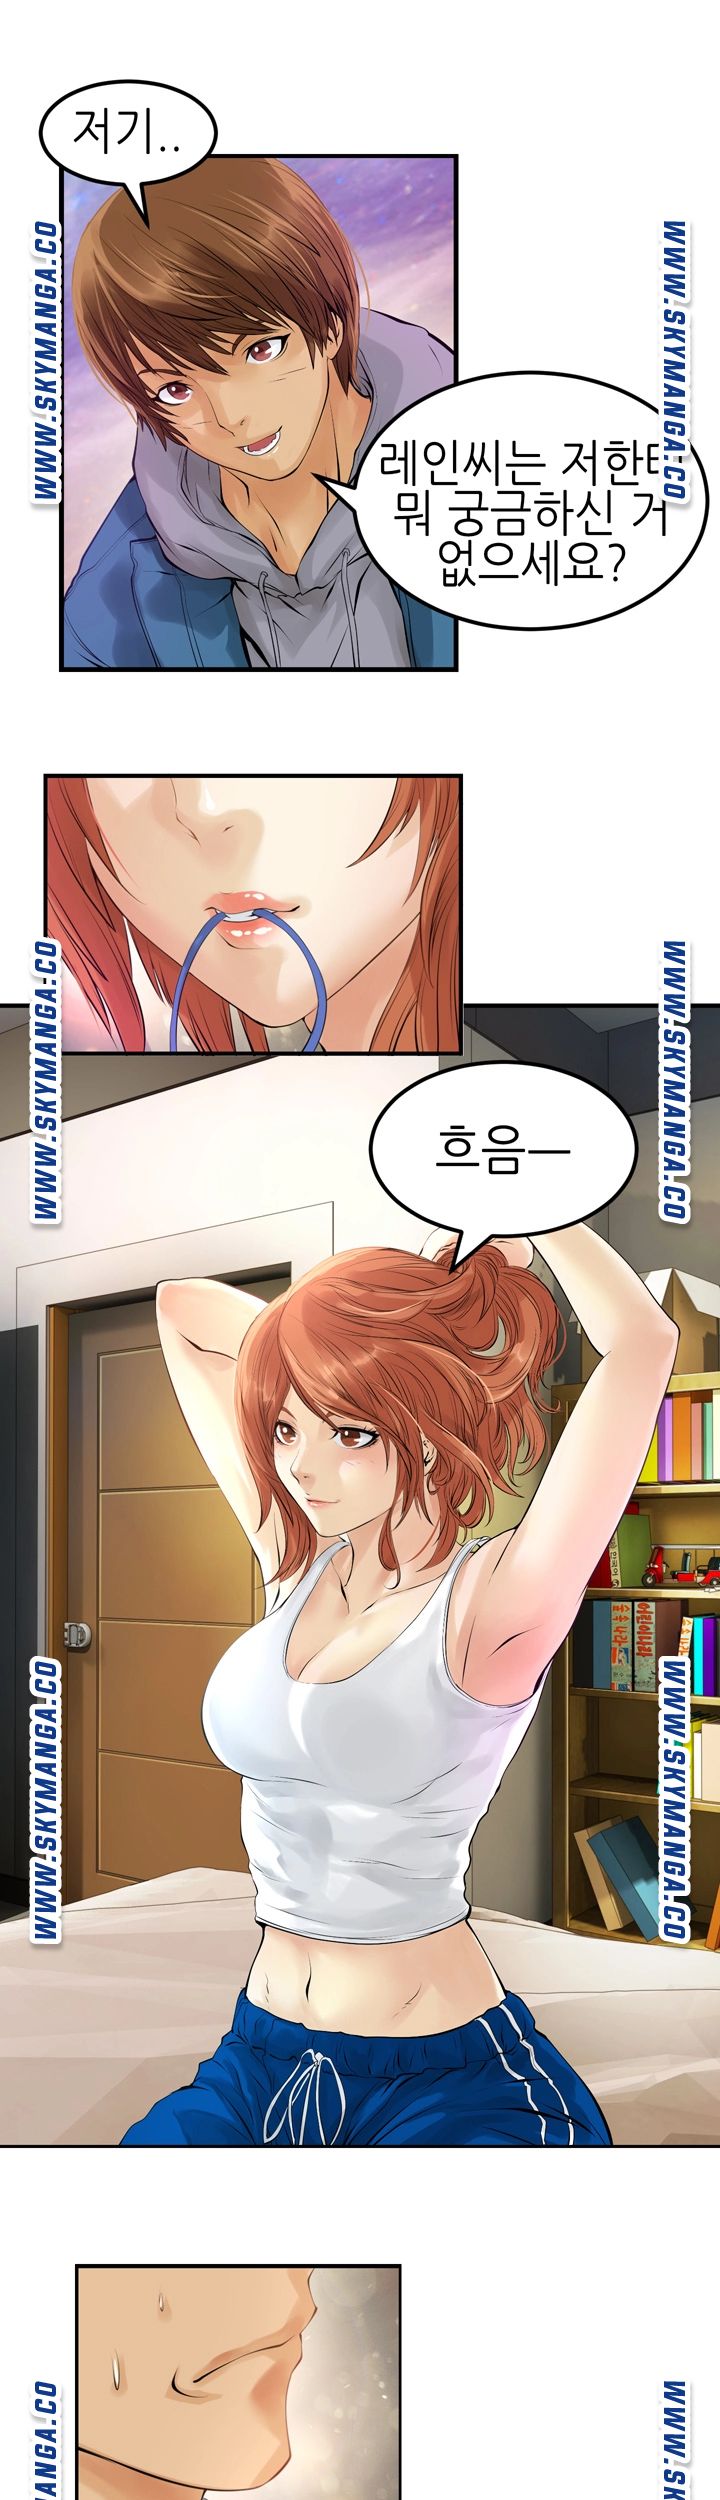 Exchange Student Raw - Chapter 3 Page 9